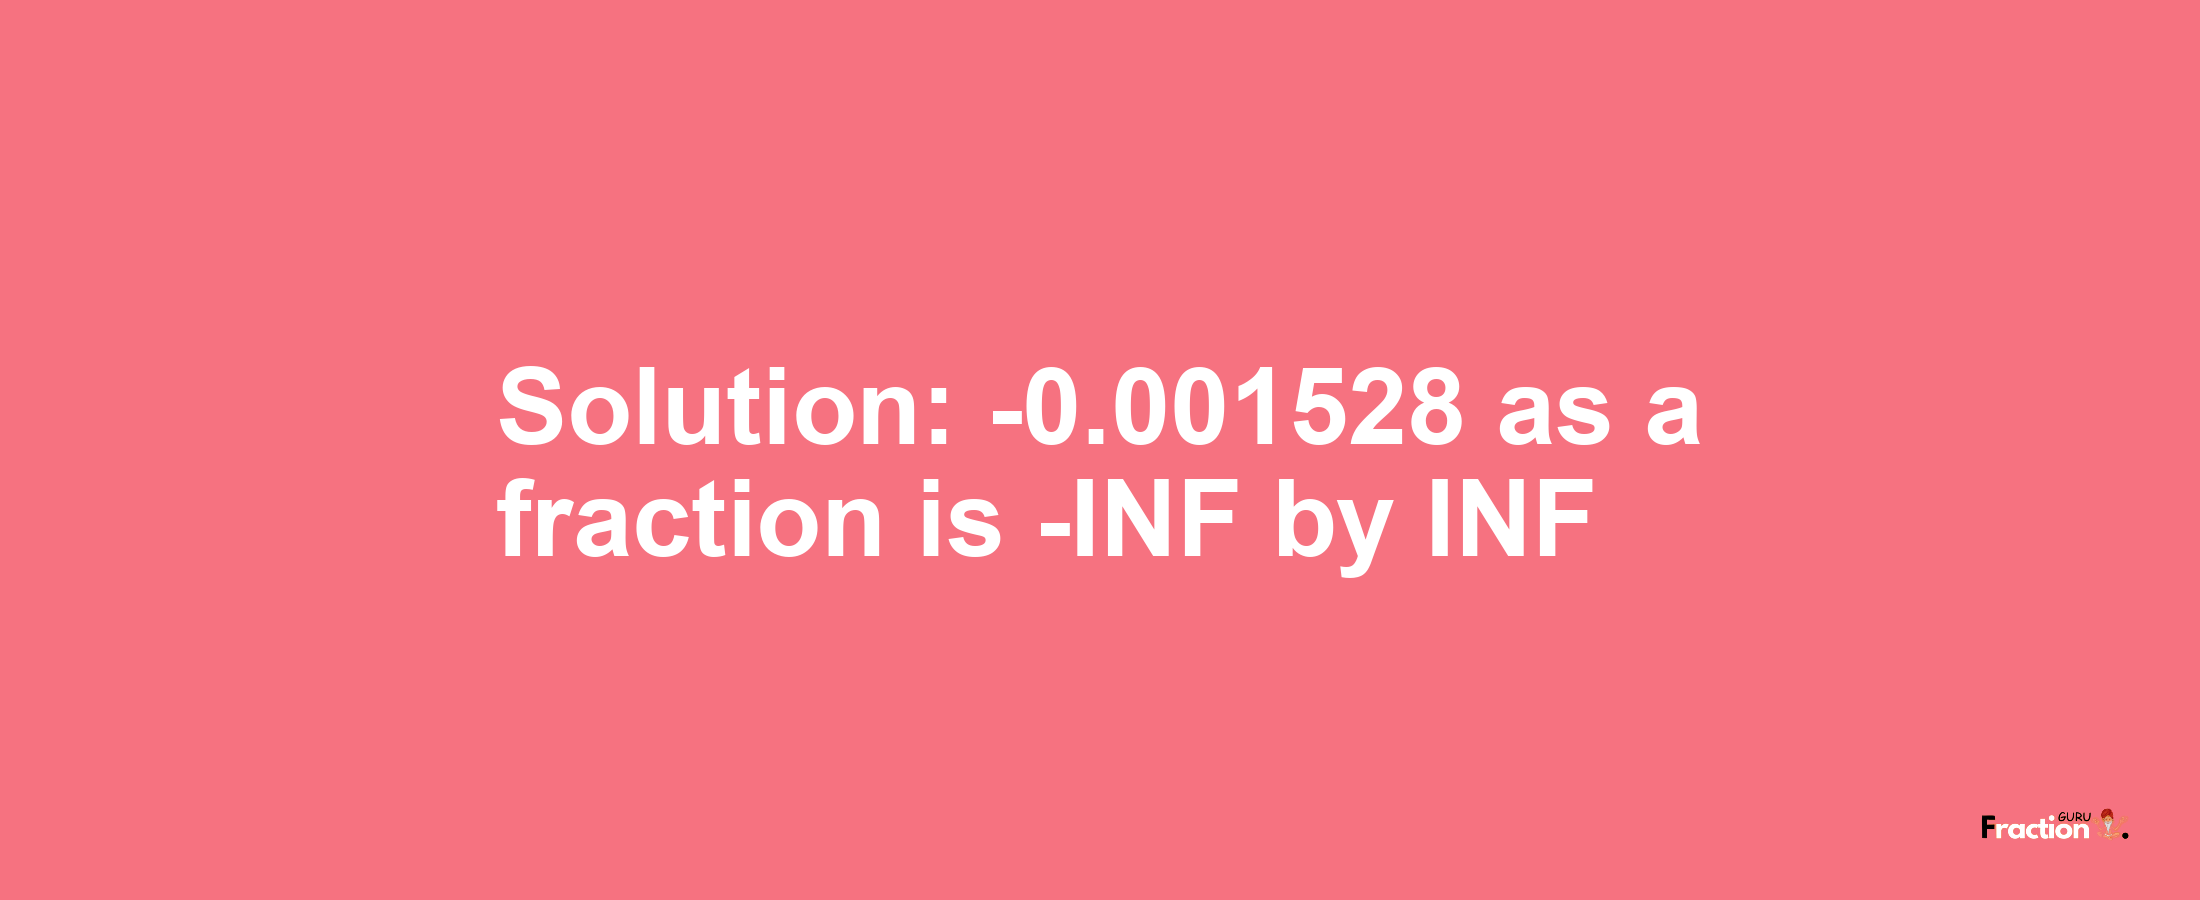 Solution:-0.001528 as a fraction is -INF/INF